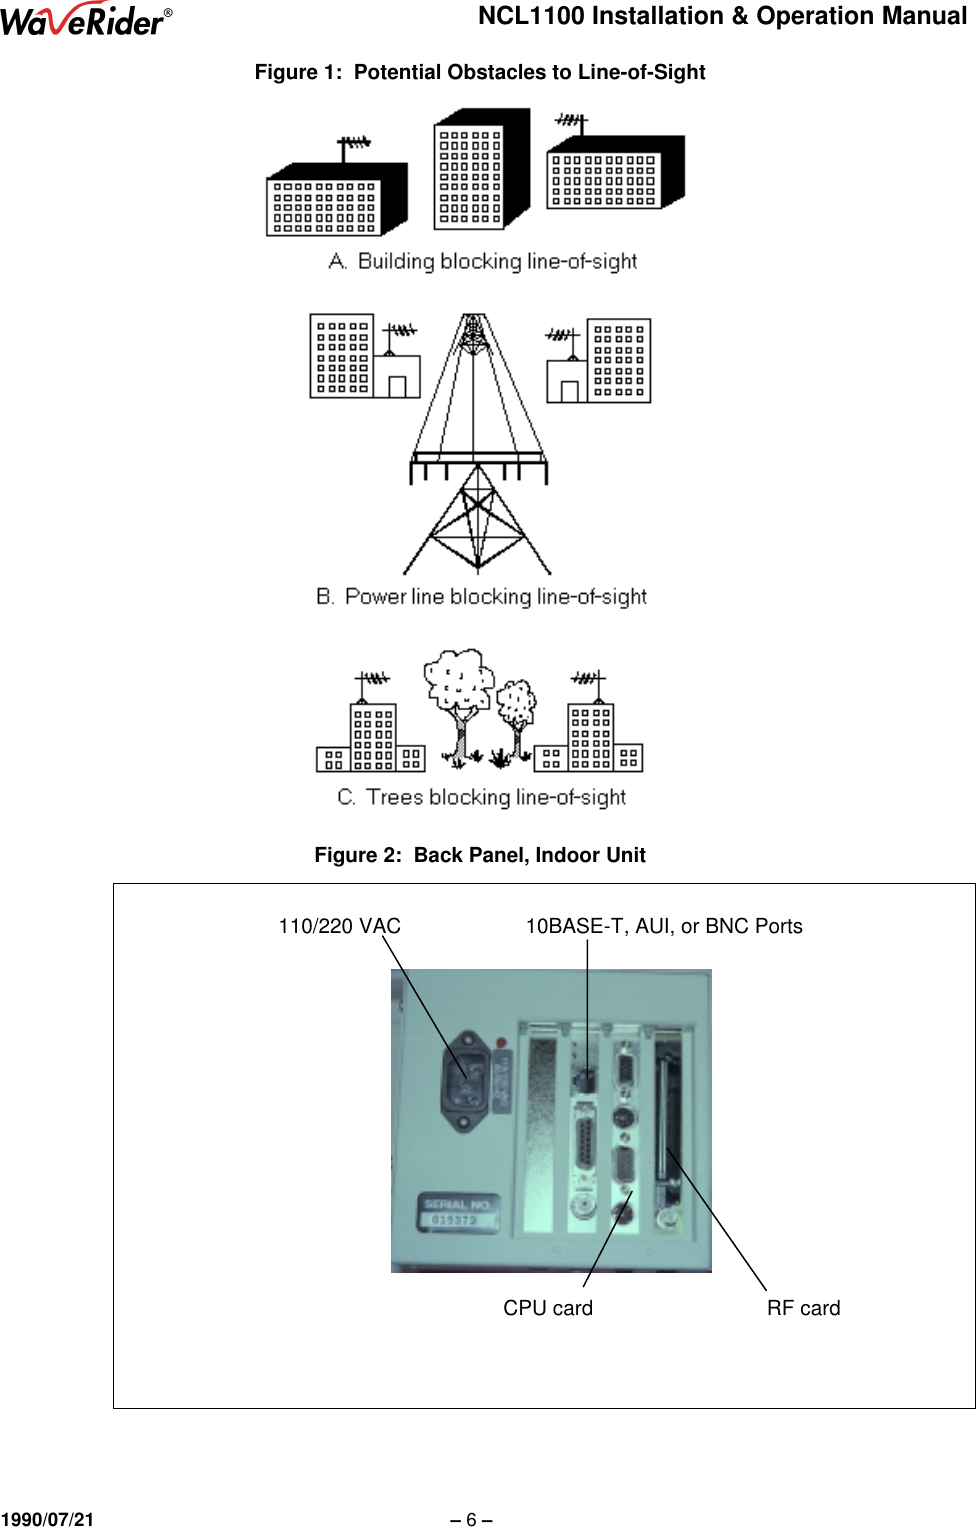 NCL1100 Installation &amp; Operation Manual1990/07/21 – 6 –Figure 1:  Potential Obstacles to Line-of-SightFigure 2:  Back Panel, Indoor Unit110/220 VAC 10BASE-T, AUI, or BNC PortsCPU card RF card